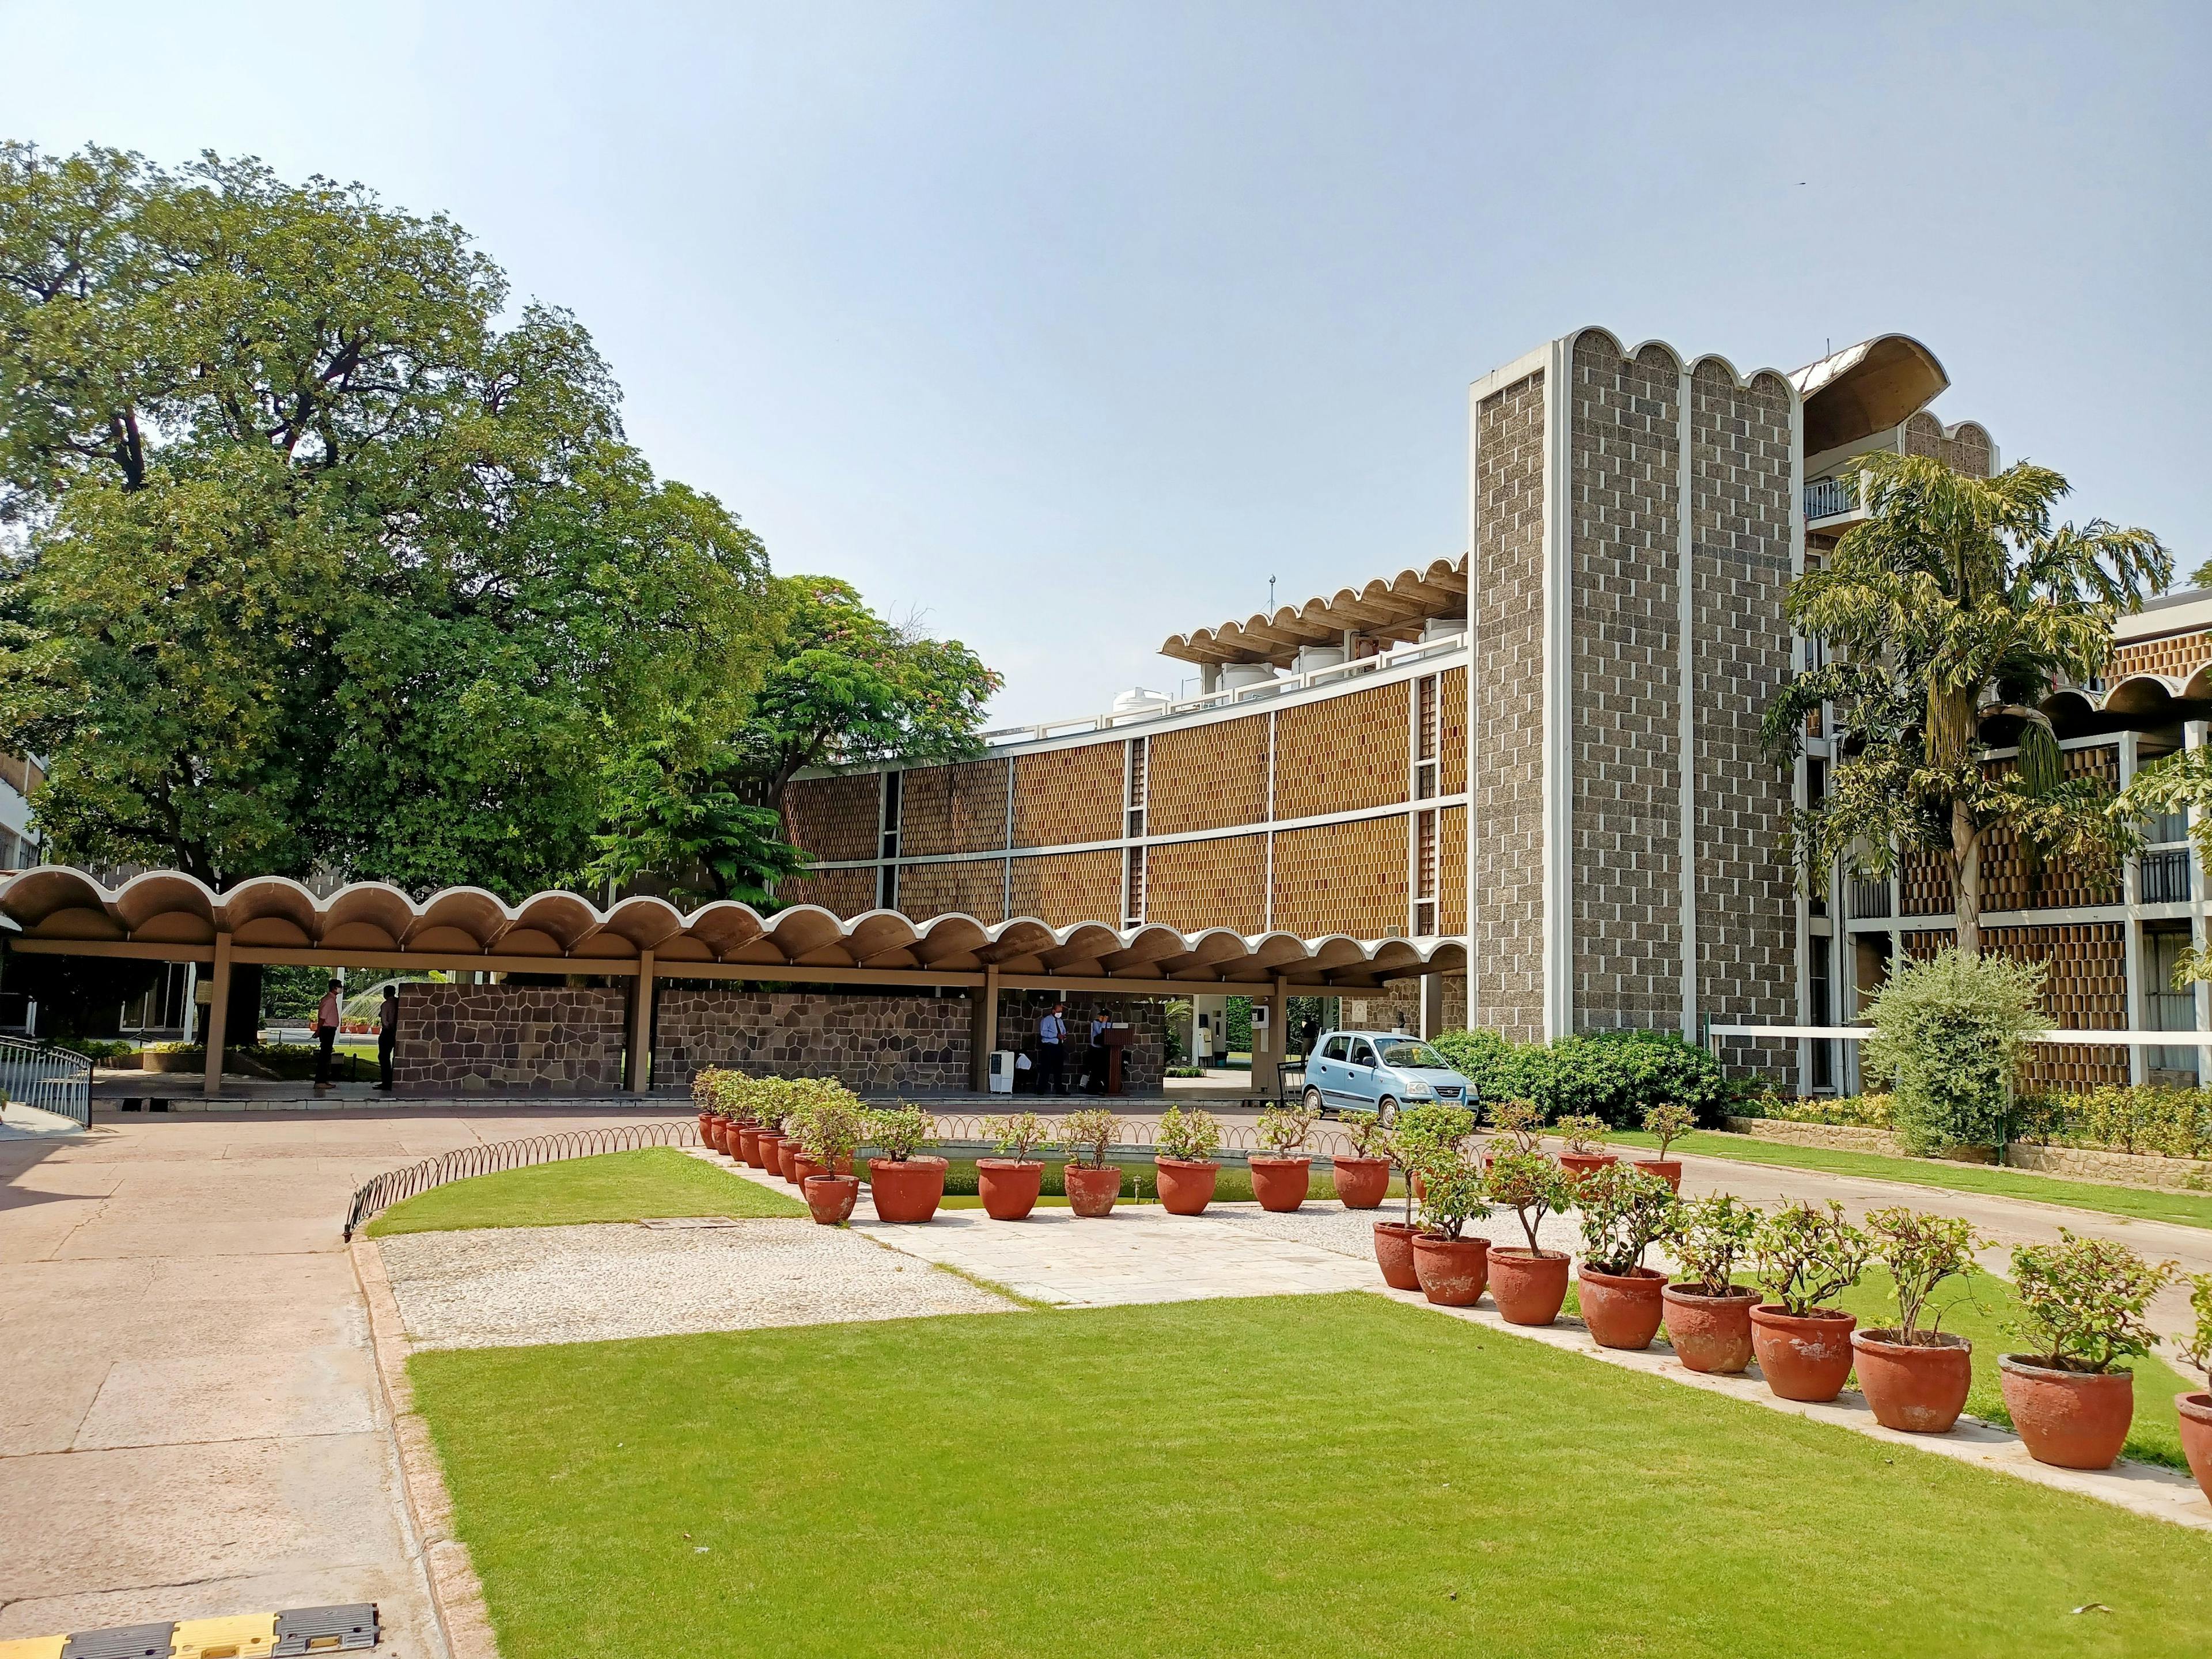 Green spaces connecting buildings with India International Centre 